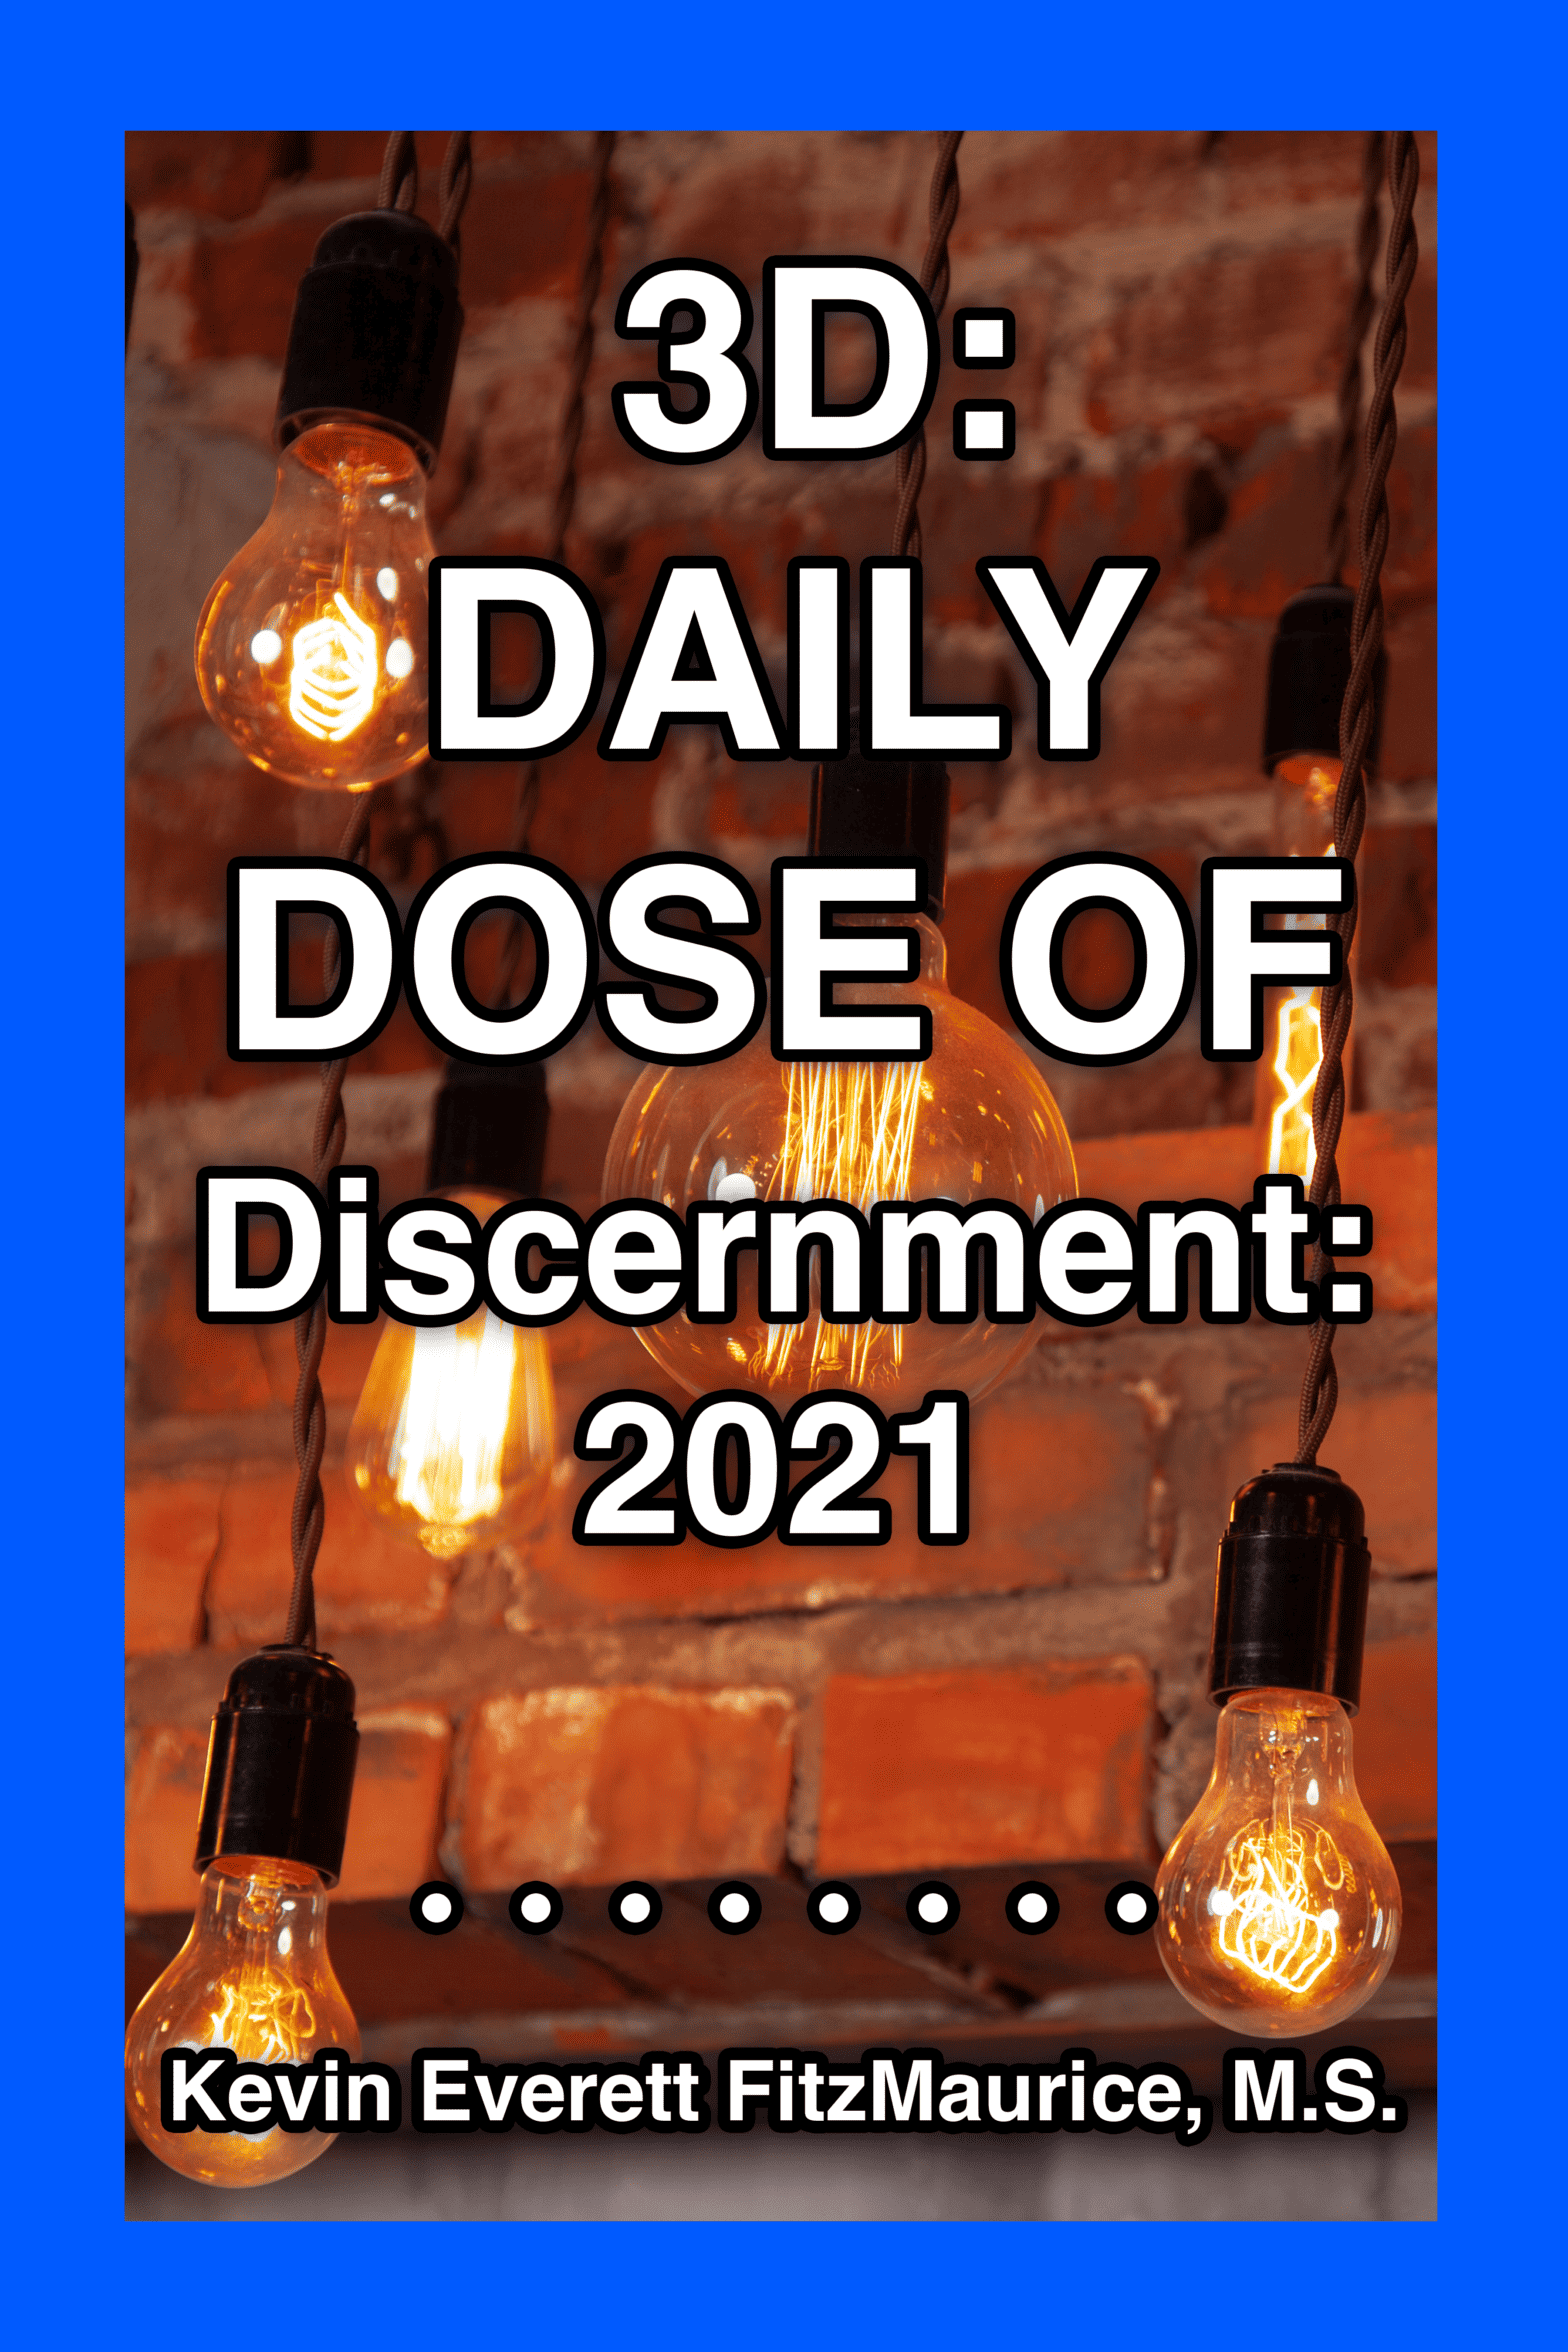 3D Daily Dose of Discernment 2021 book cover.